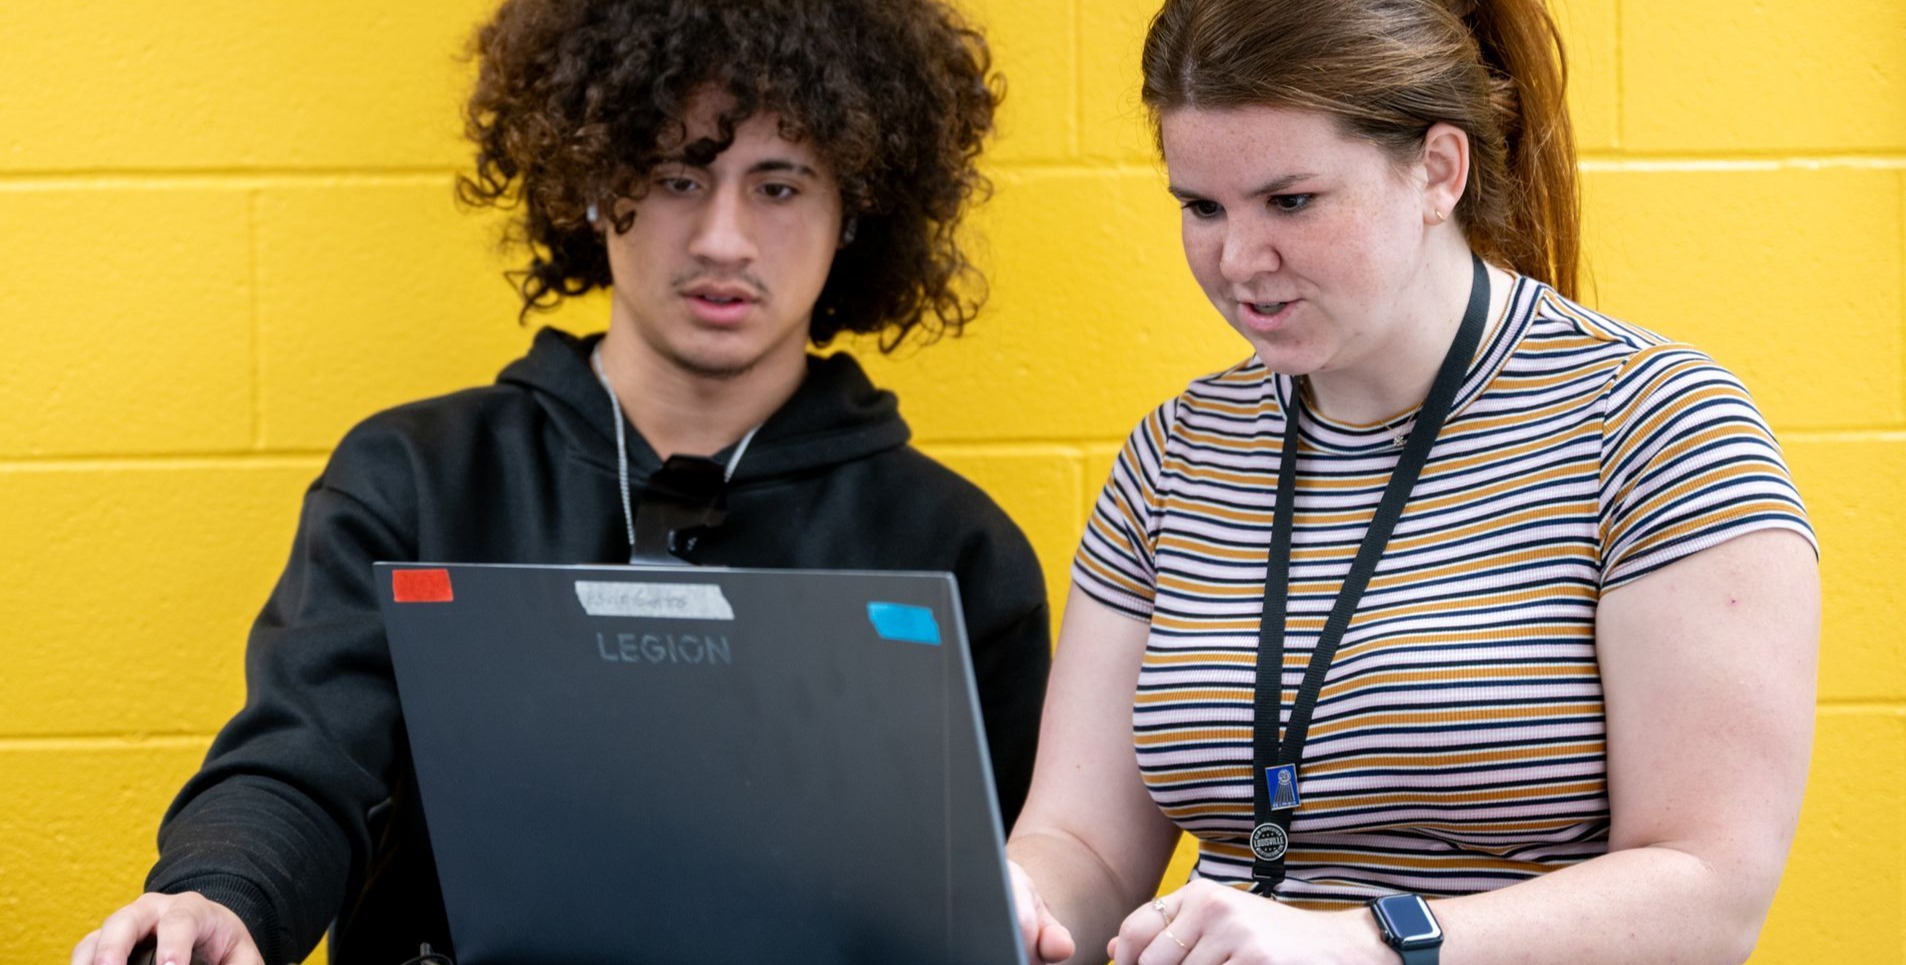 students working together on a laptop